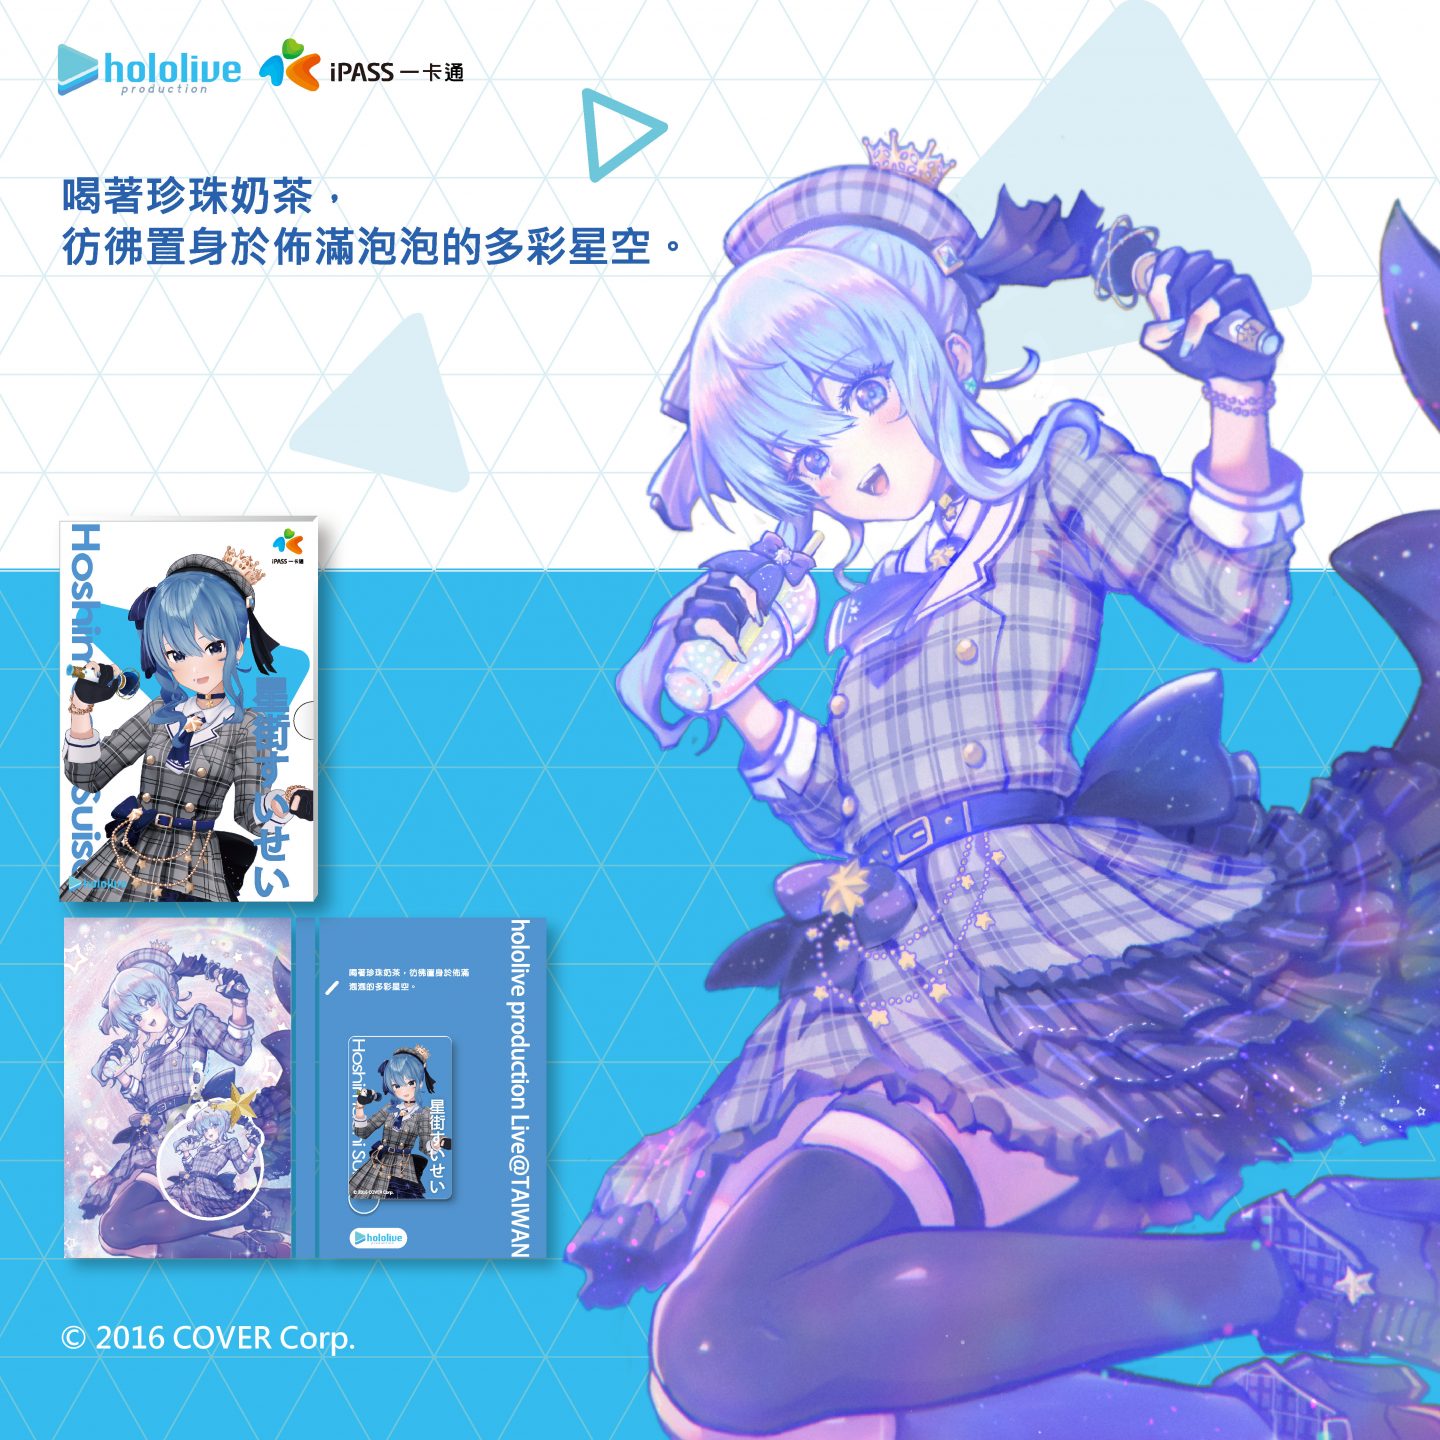 hololive production x iPASS Collaboration Card is Now Available